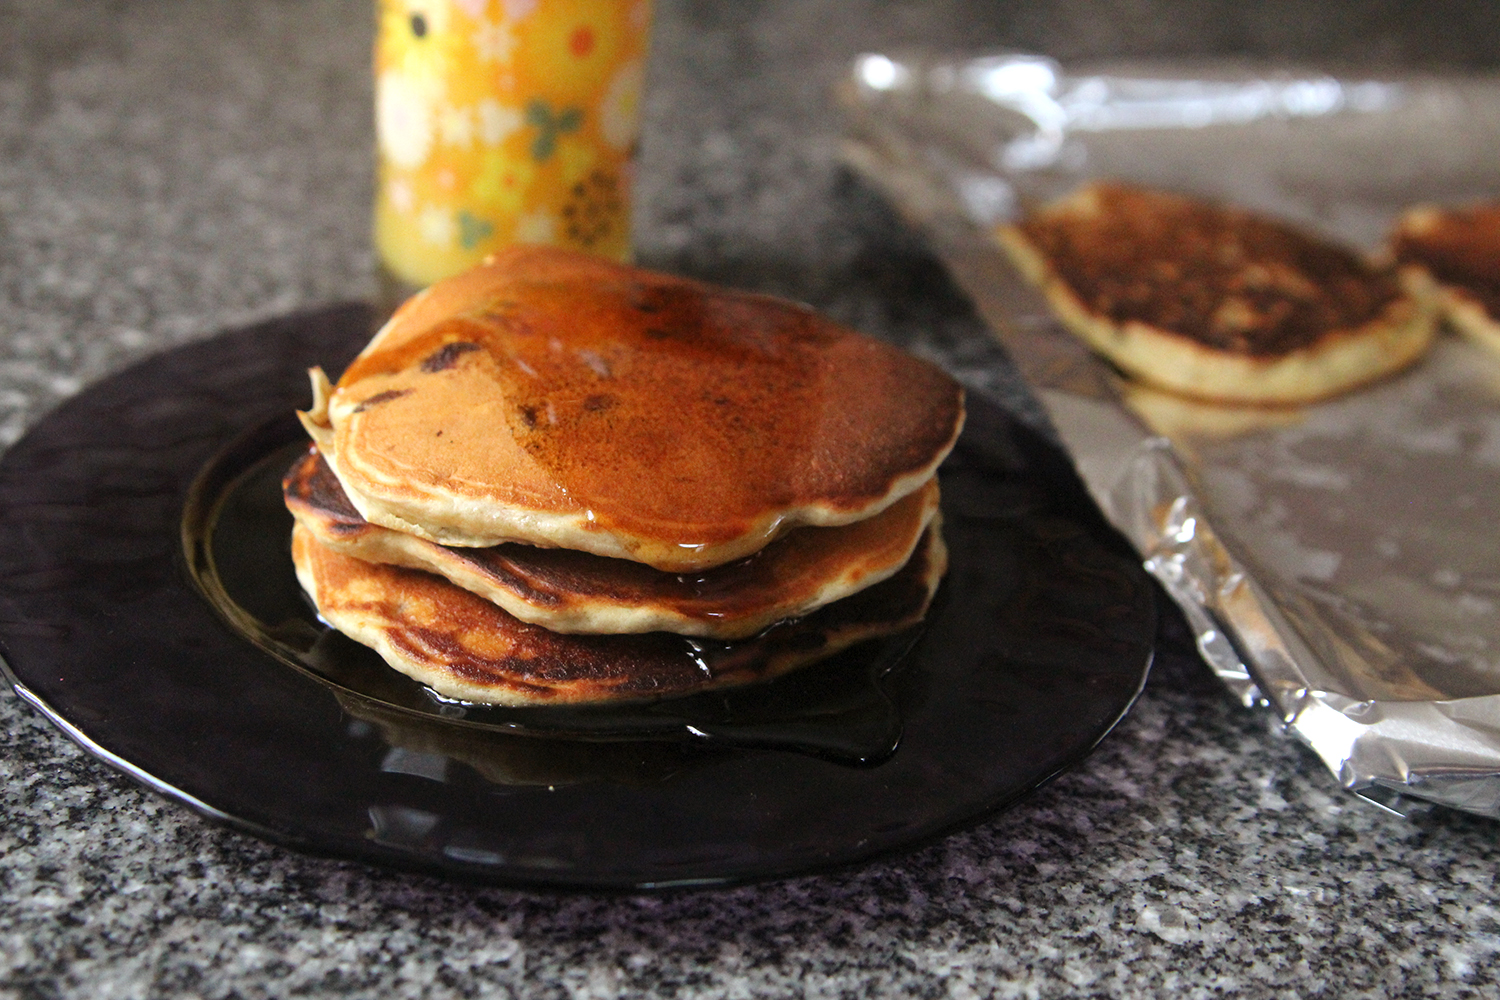 Banana Chocolate Chip Pancakes Recipe (With Make-Ahead Instructions!)